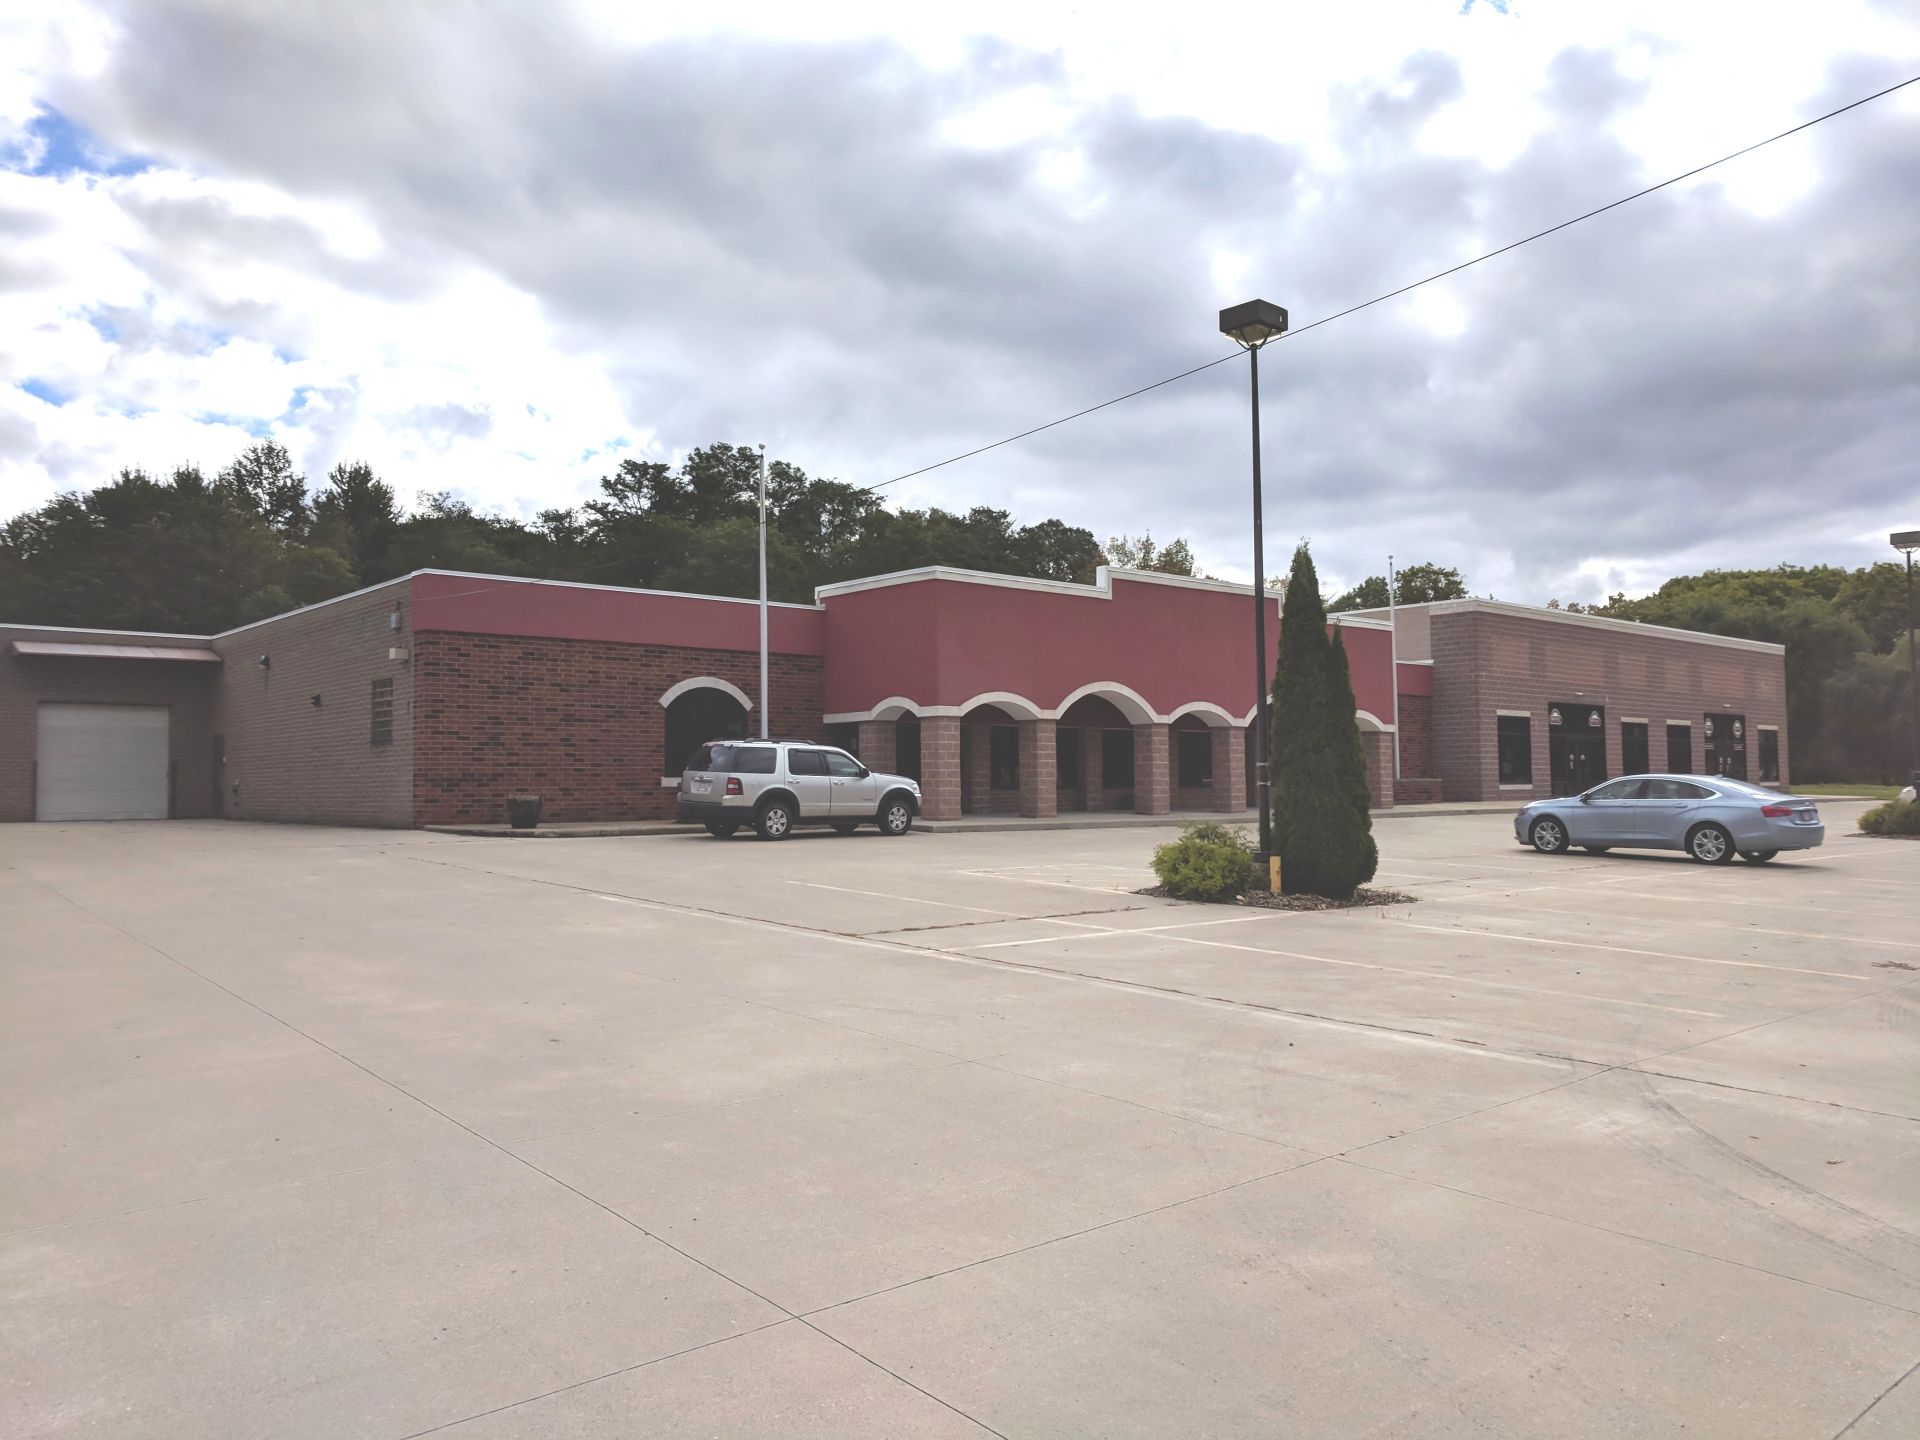 Large Retail Building for Sale in Kirtland, Ohio.